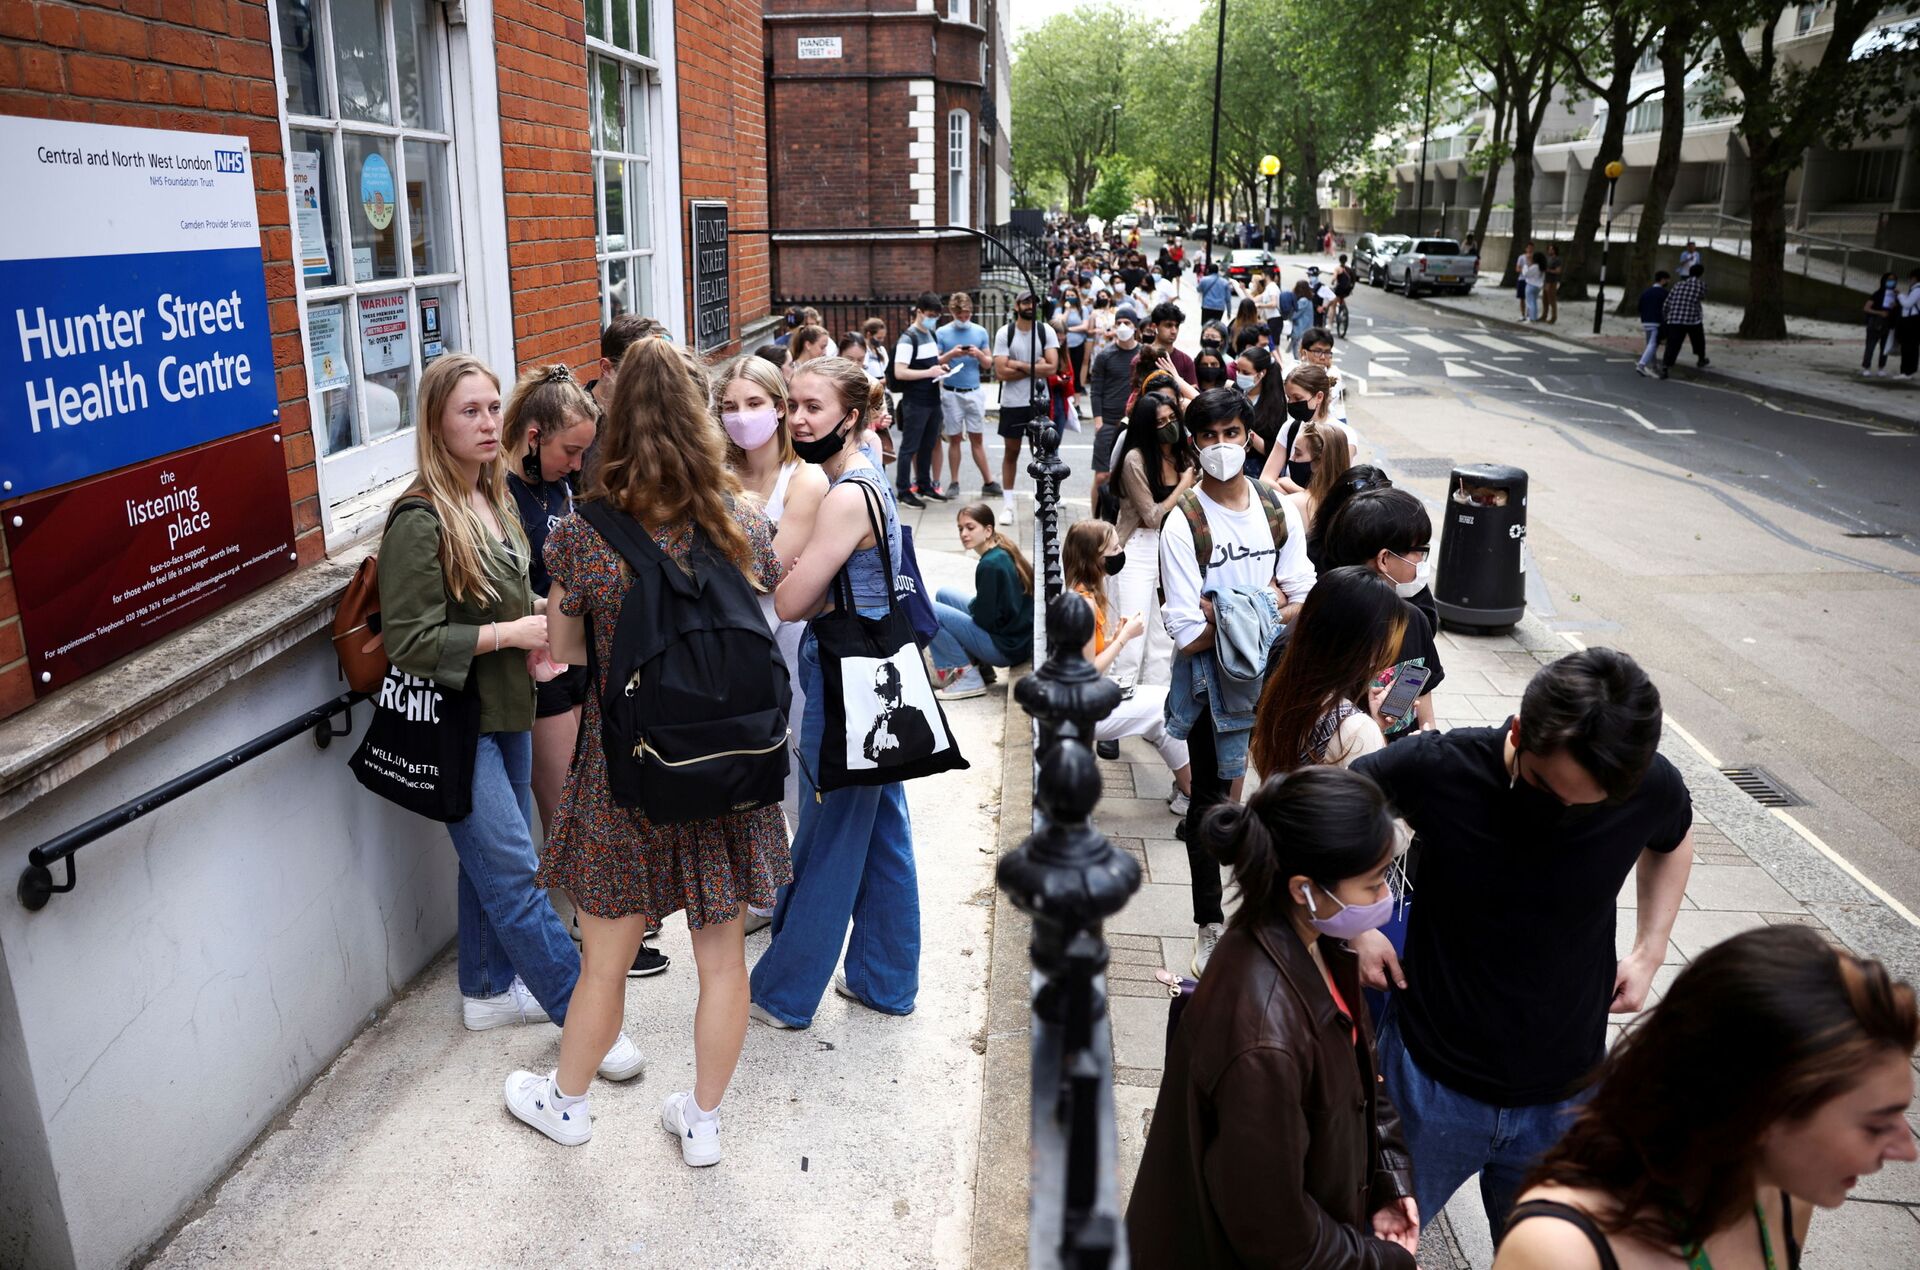 People queue outside a vaccination centre for young people and students at the Hunter Street Health Centre, amid the coronavirus disease (COVID-19) outbreak, in London, Britain, June 5, 2021 - Sputnik International, 1920, 07.09.2021